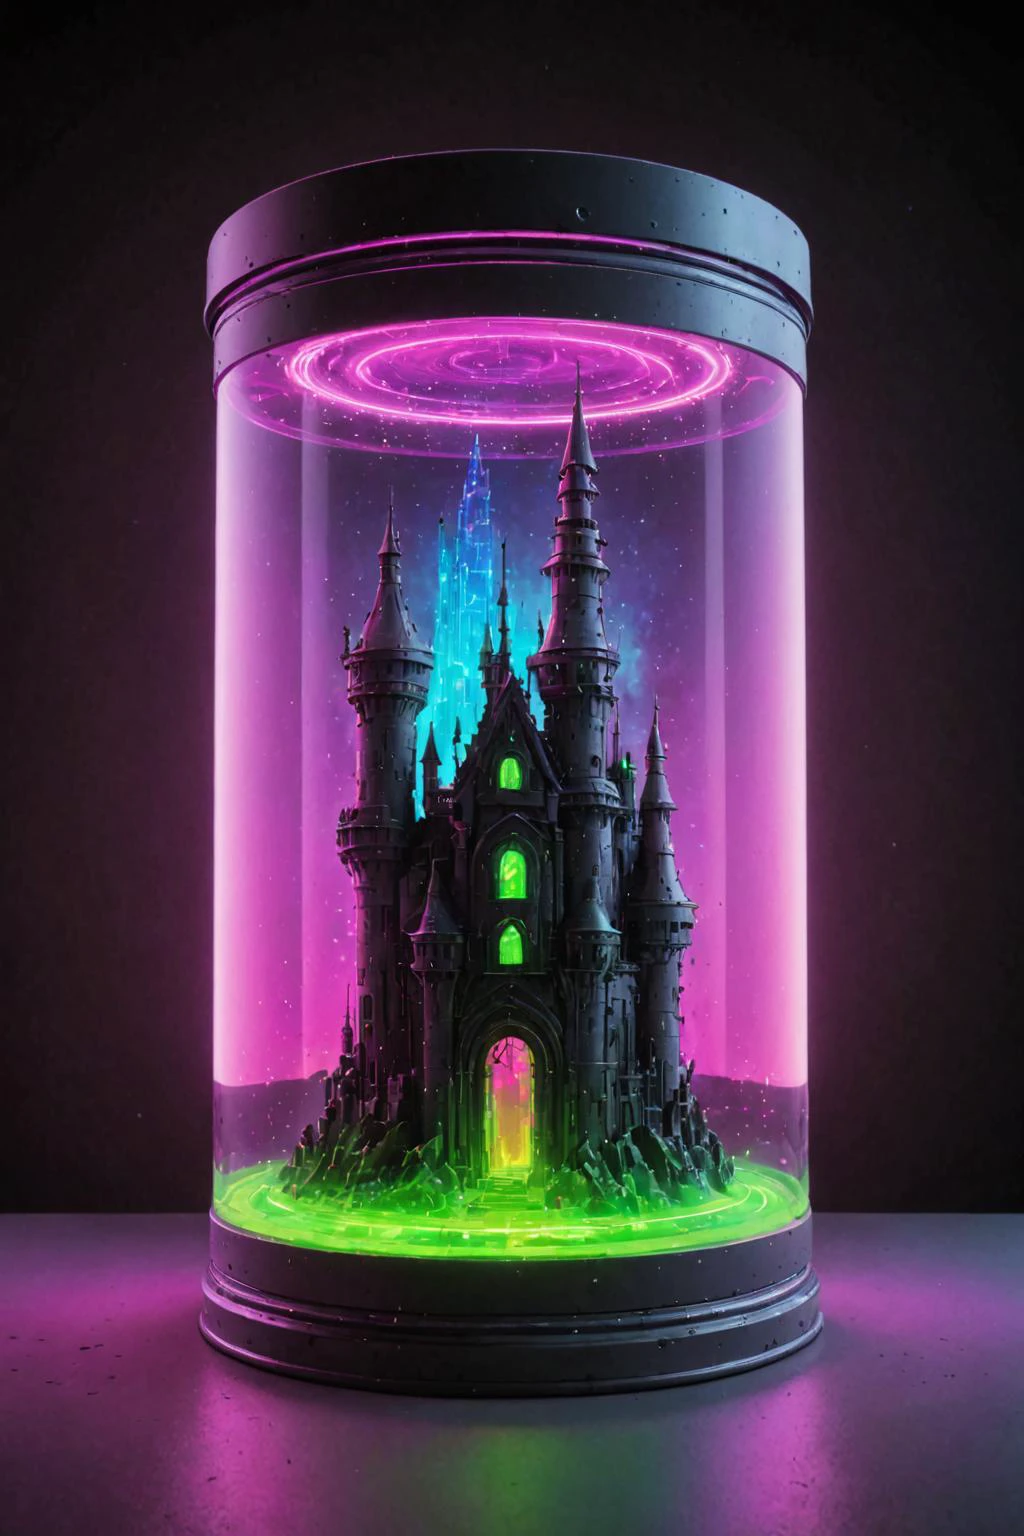 contained color,  a colorful castle in a large cylindrical rectangular cyberpunk container with (neon green glass) , rainbow substance,